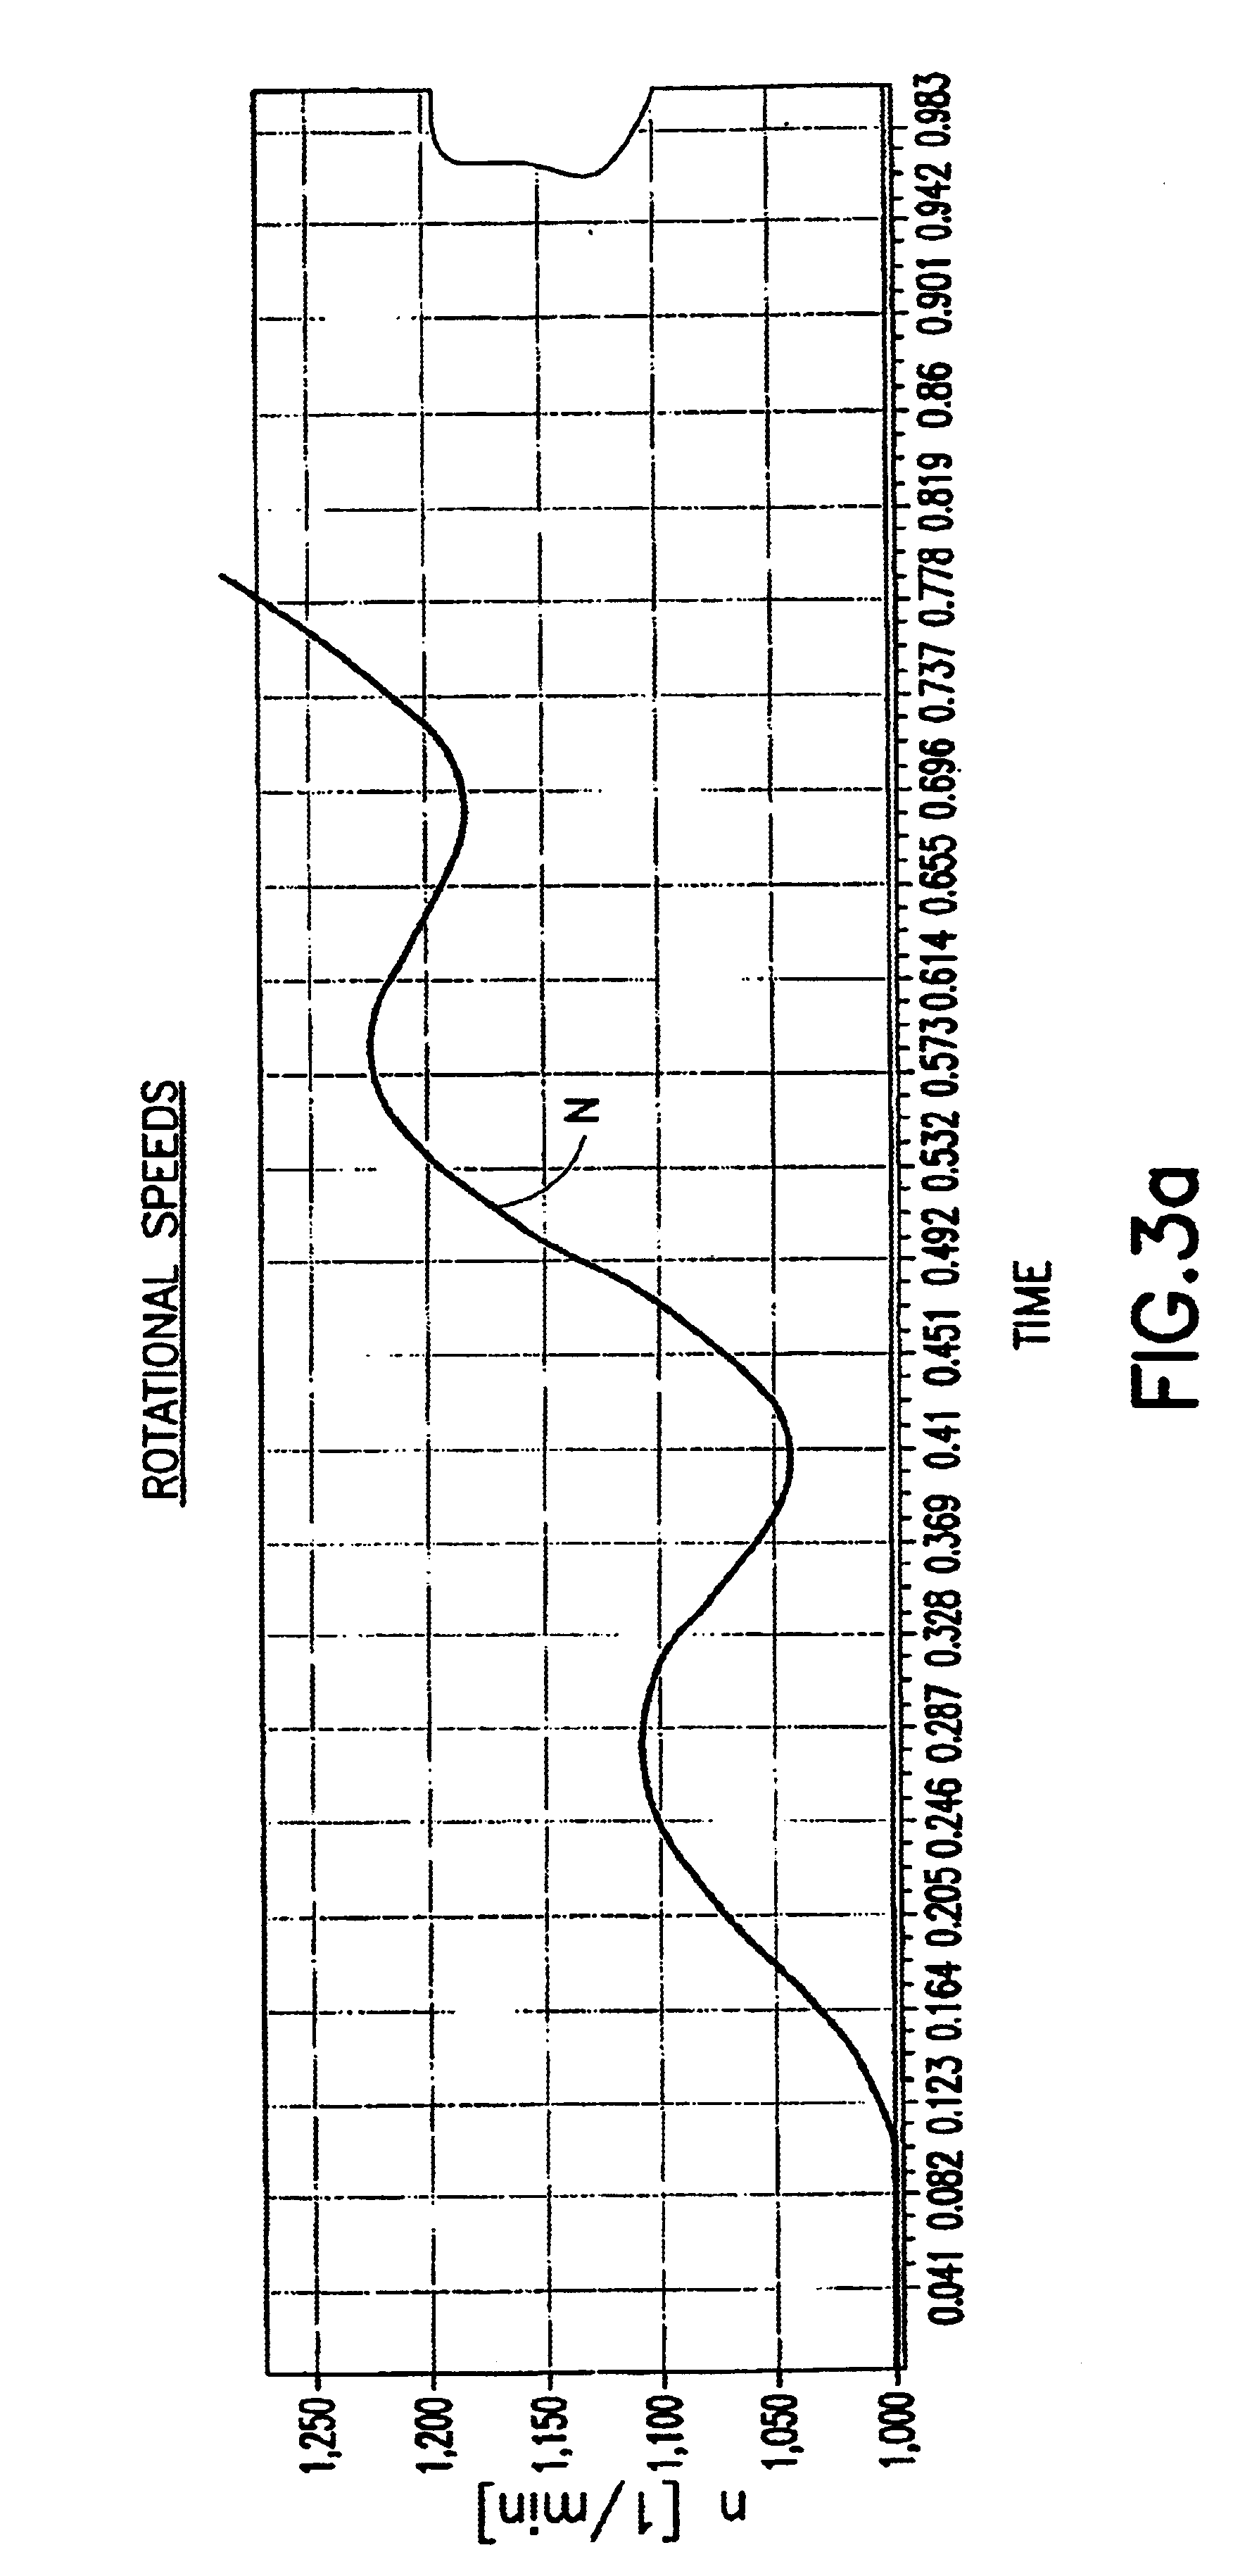 Method and device for the reduction of load cycle oscillations in the drive train of a motor vehicle